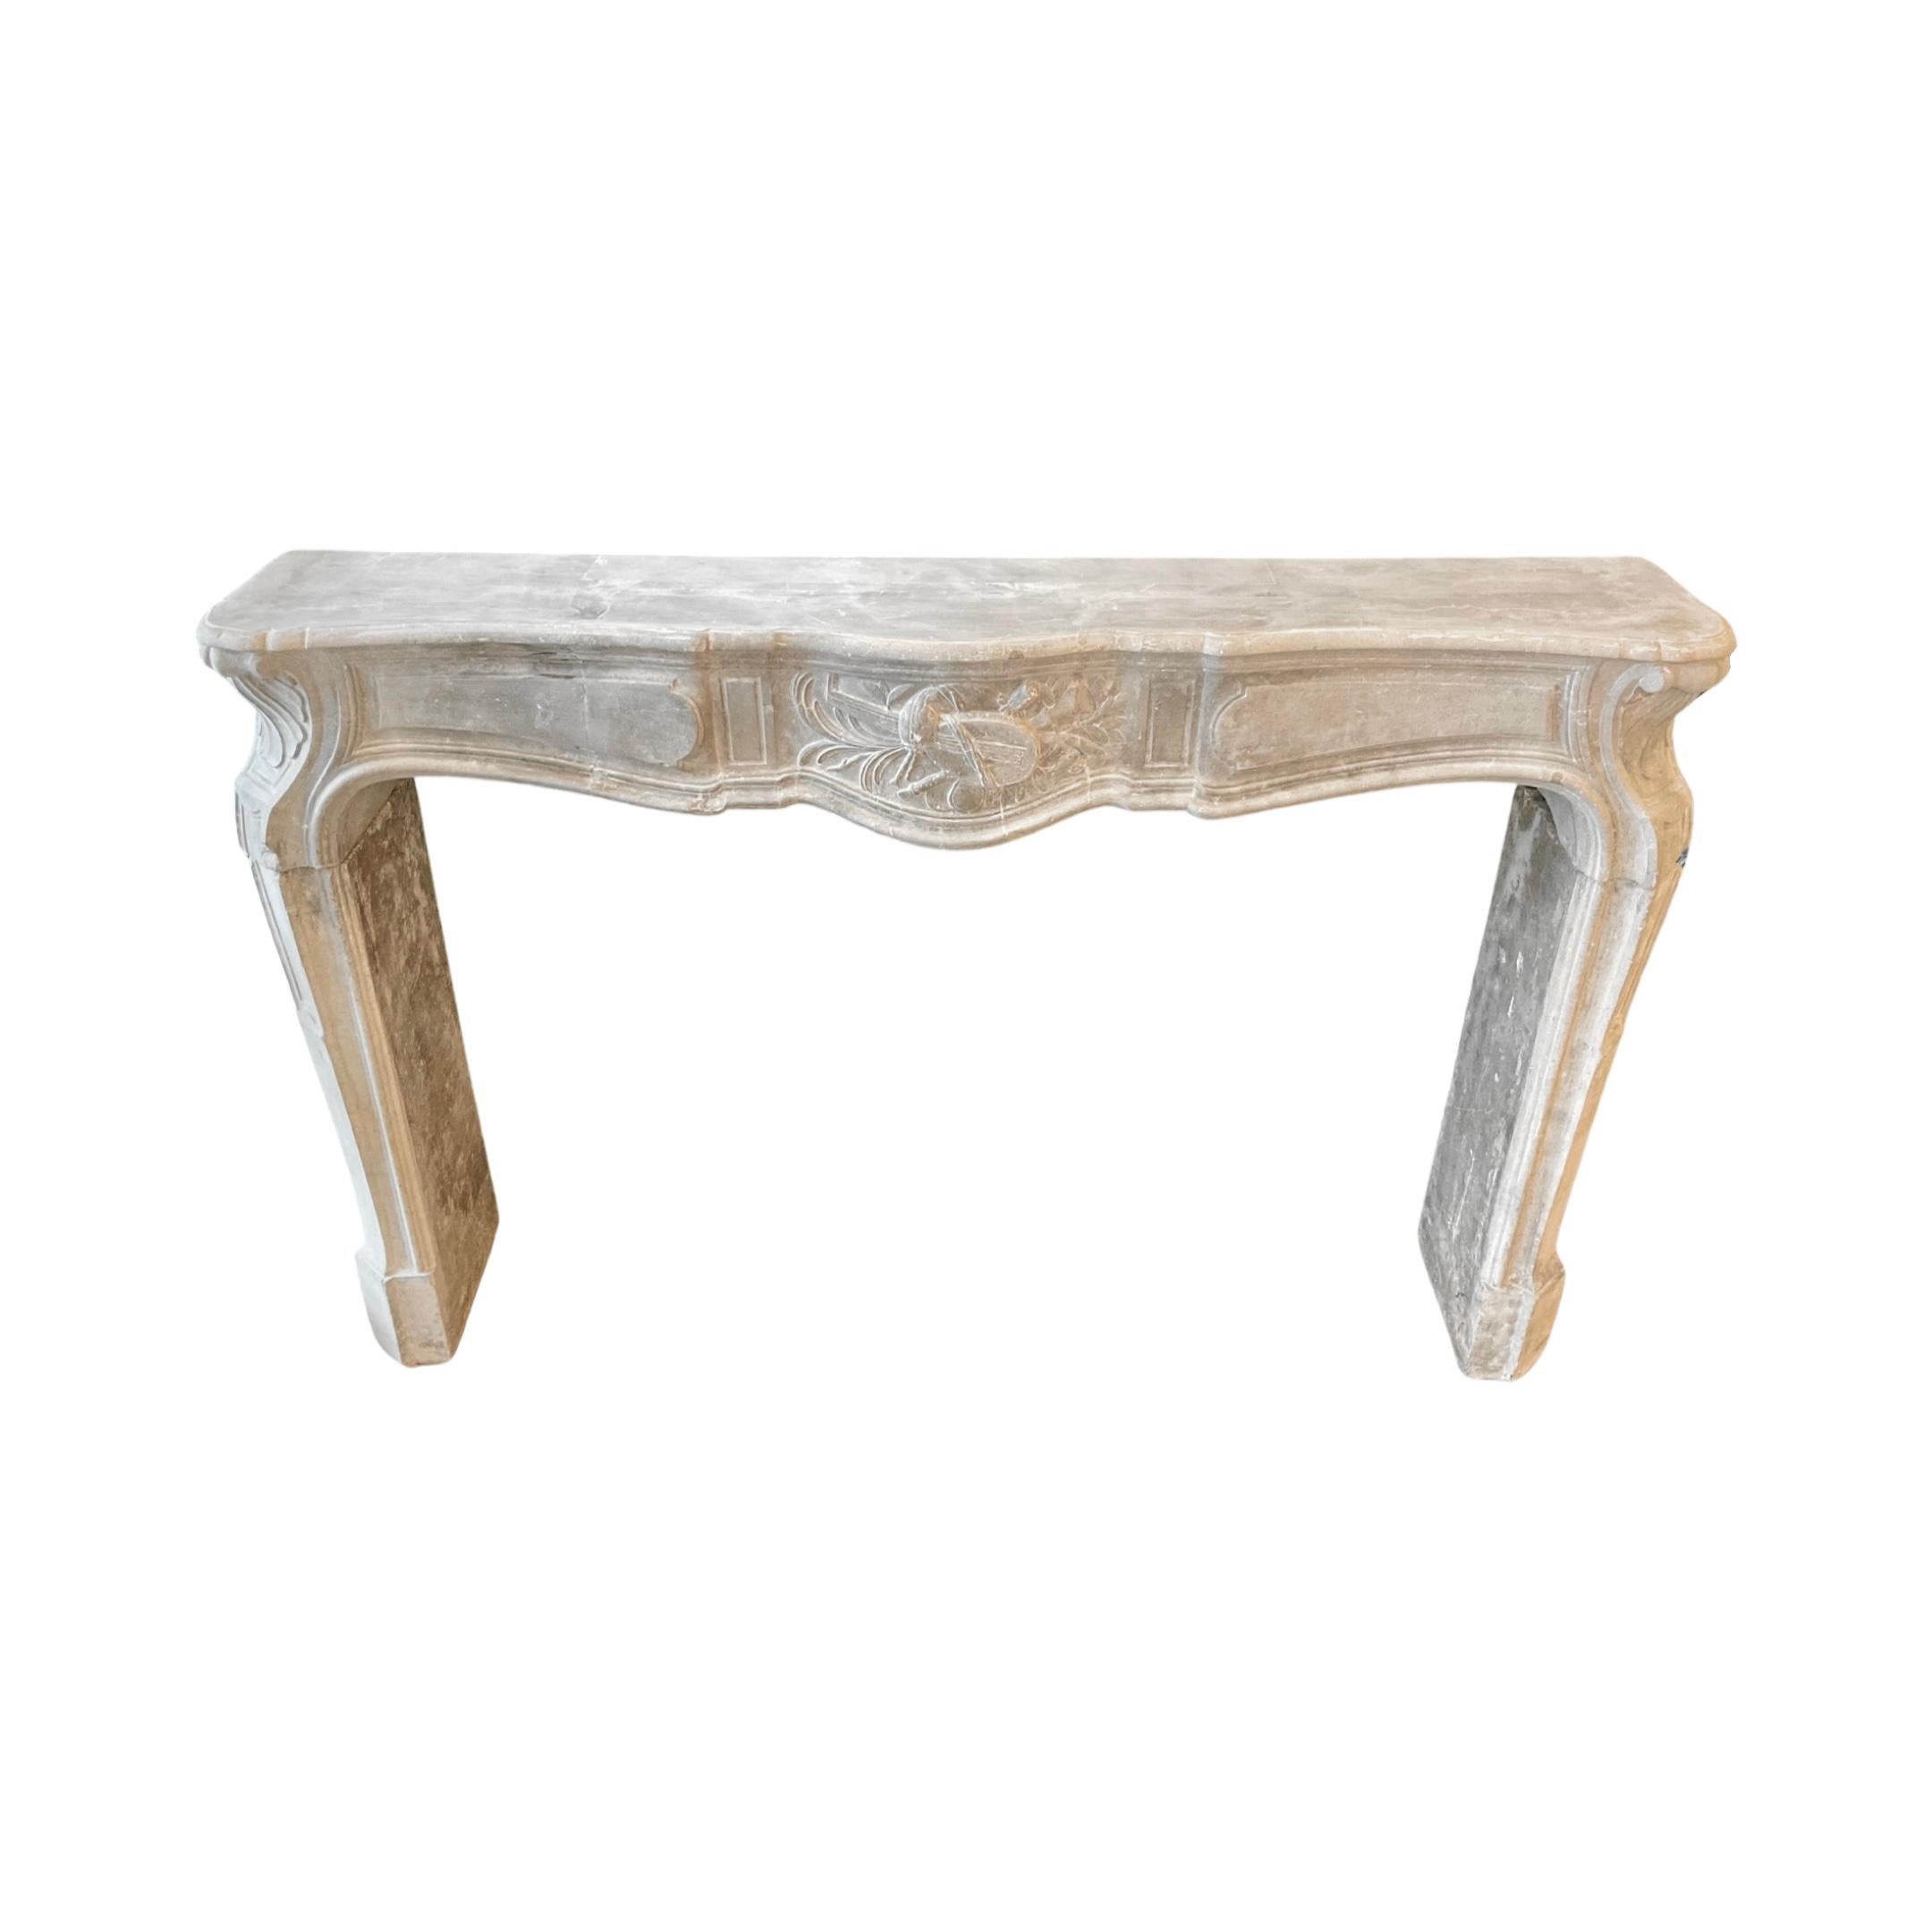 Expertly crafted in Belgium during the 18th century, our Belgian Bluestone Mantel features intricate carvings on the legs and a unique centerpiece with musical instrument motifs. Made from high-quality bluestone, this mantel adds elegance and